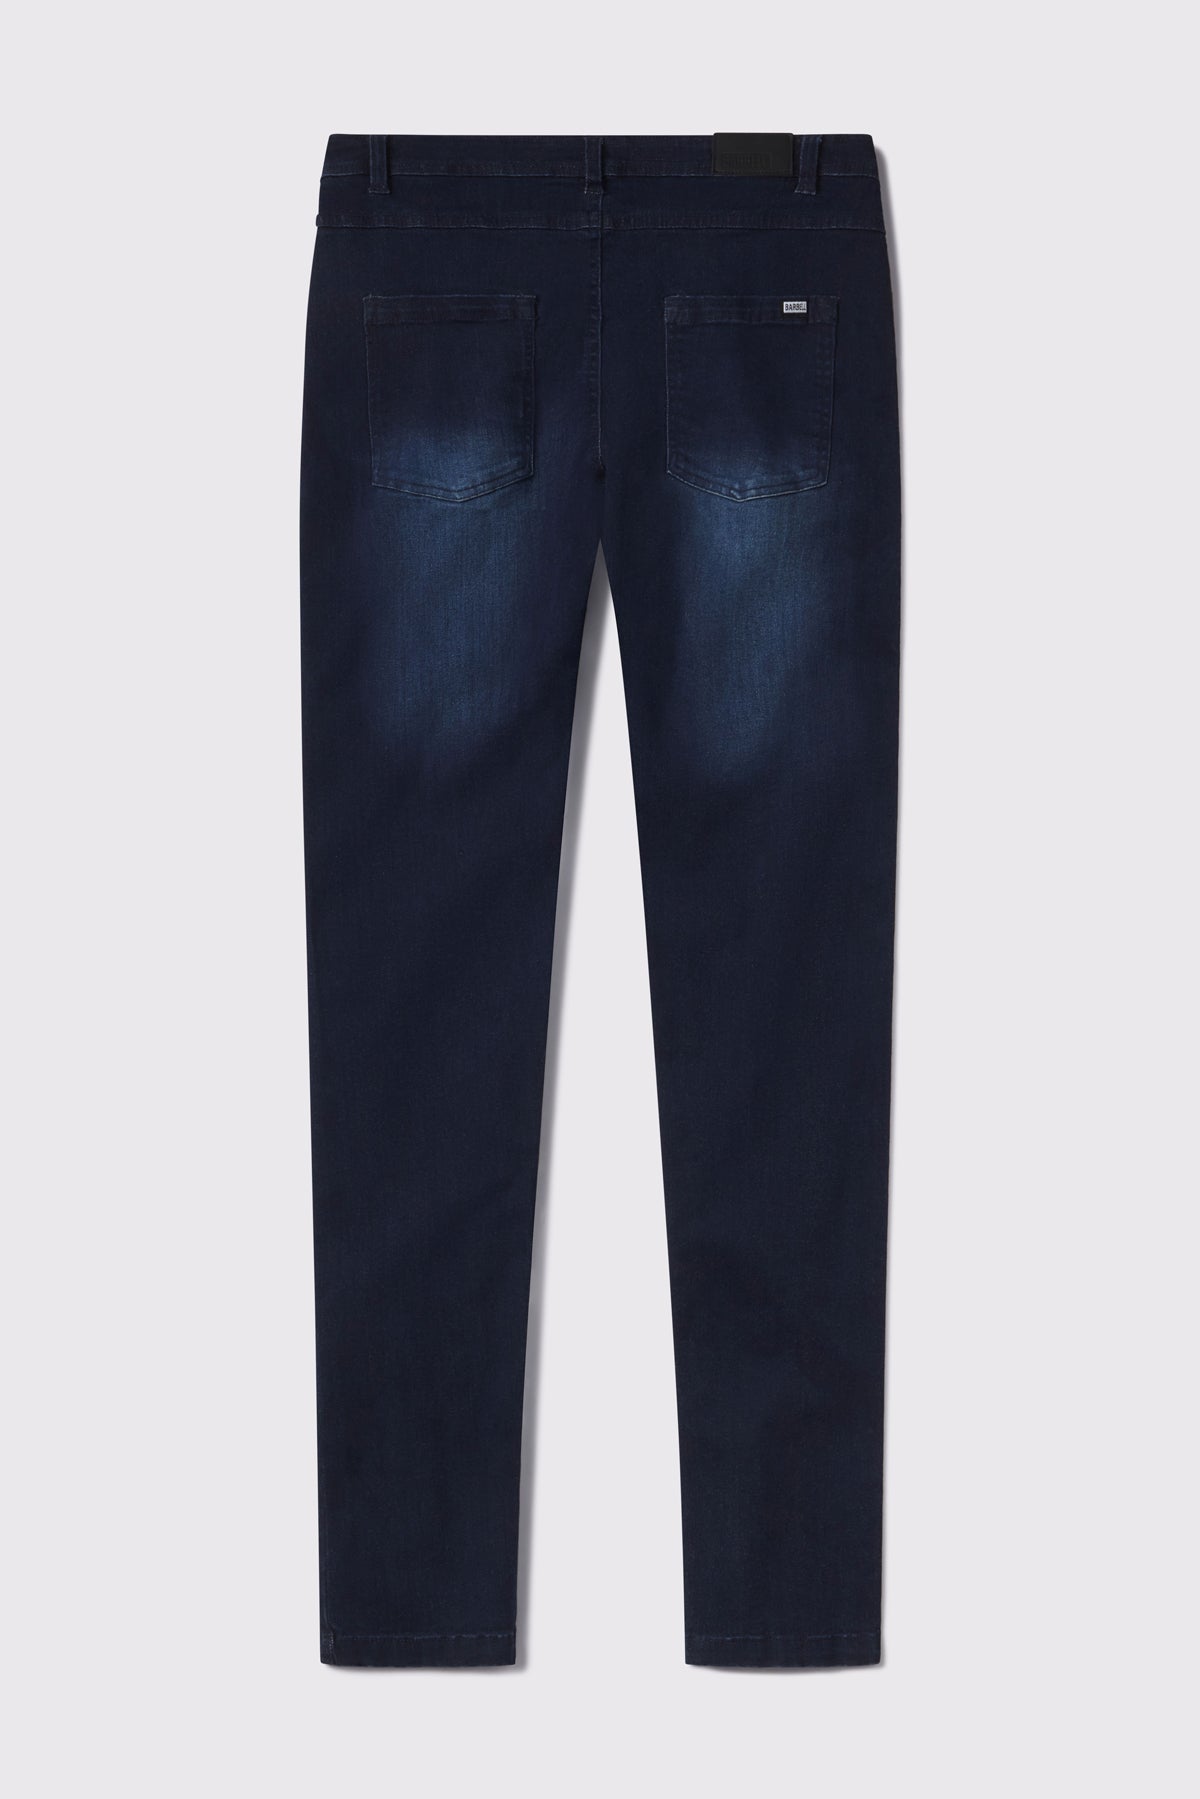 Mens Slim Athletic Fit Jeans 2.0 -Dark Distressed - photo from back flat lay #color_dark-distressed